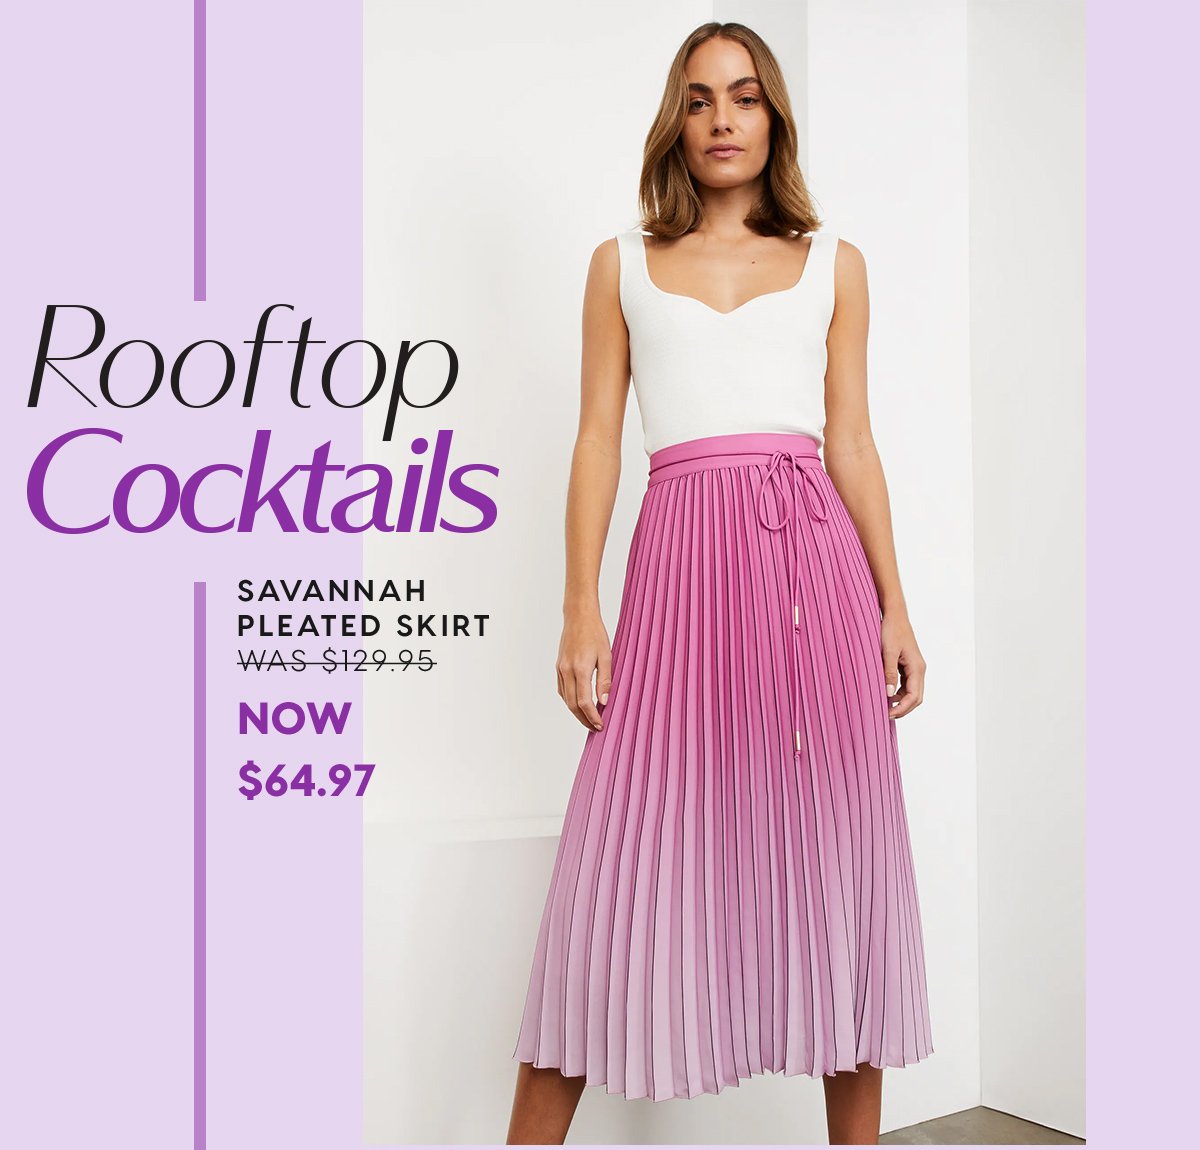 Rooftop Cocktails. Savannah Pleated Skirt WAS $129.95 NOW $64.97